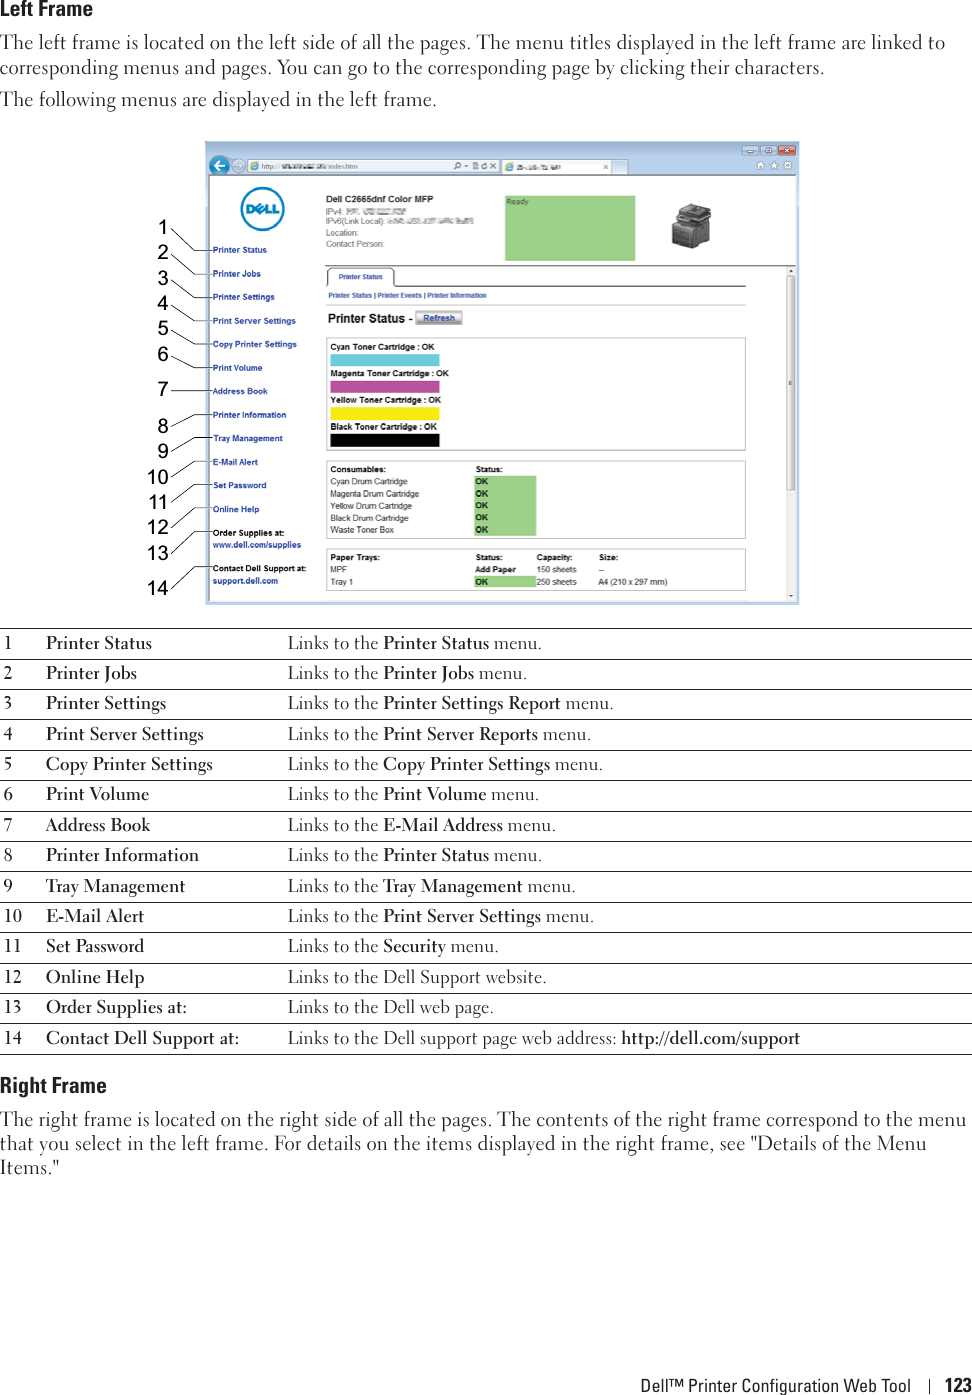 Dell™ Printer Configuration Web Tool 123Left FrameThe left frame is located on the left side of all the pages. The menu titles displayed in the left frame are linked to corresponding menus and pages. You can go to the corresponding page by clicking their characters.The following menus are displayed in the left frame.Right FrameThe right frame is located on the right side of all the pages. The contents of the right frame correspond to the menu that you select in the left frame. For details on the items displayed in the right frame, see &quot;Details of the Menu Items.&quot;1Printer Status Links to the Printer Status menu.2Printer Jobs Links to the Printer Jobs menu.3 Printer Settings Links to the Printer Settings Report menu.4 Print Server Settings Links to the Print Server Reports menu.5 Copy Printer Settings Links to the Copy Printer Settings menu.6Print Volume Links to the Print Volume menu.7 Address Book Links to the E-Mail Address menu.8 Printer Information Links to the Printer Status menu.9 Tray Management Links to the Tray Management menu.10 E-Mail Alert Links to the Print Server Settings menu.11 Set Password Links to the Security menu.12 Online Help Links to the Dell Support website. 13 Order Supplies at: Links to the Dell web page.14 Contact Dell Support at: Links to the Dell support page web address: http://dell.com/support1234568910111213147